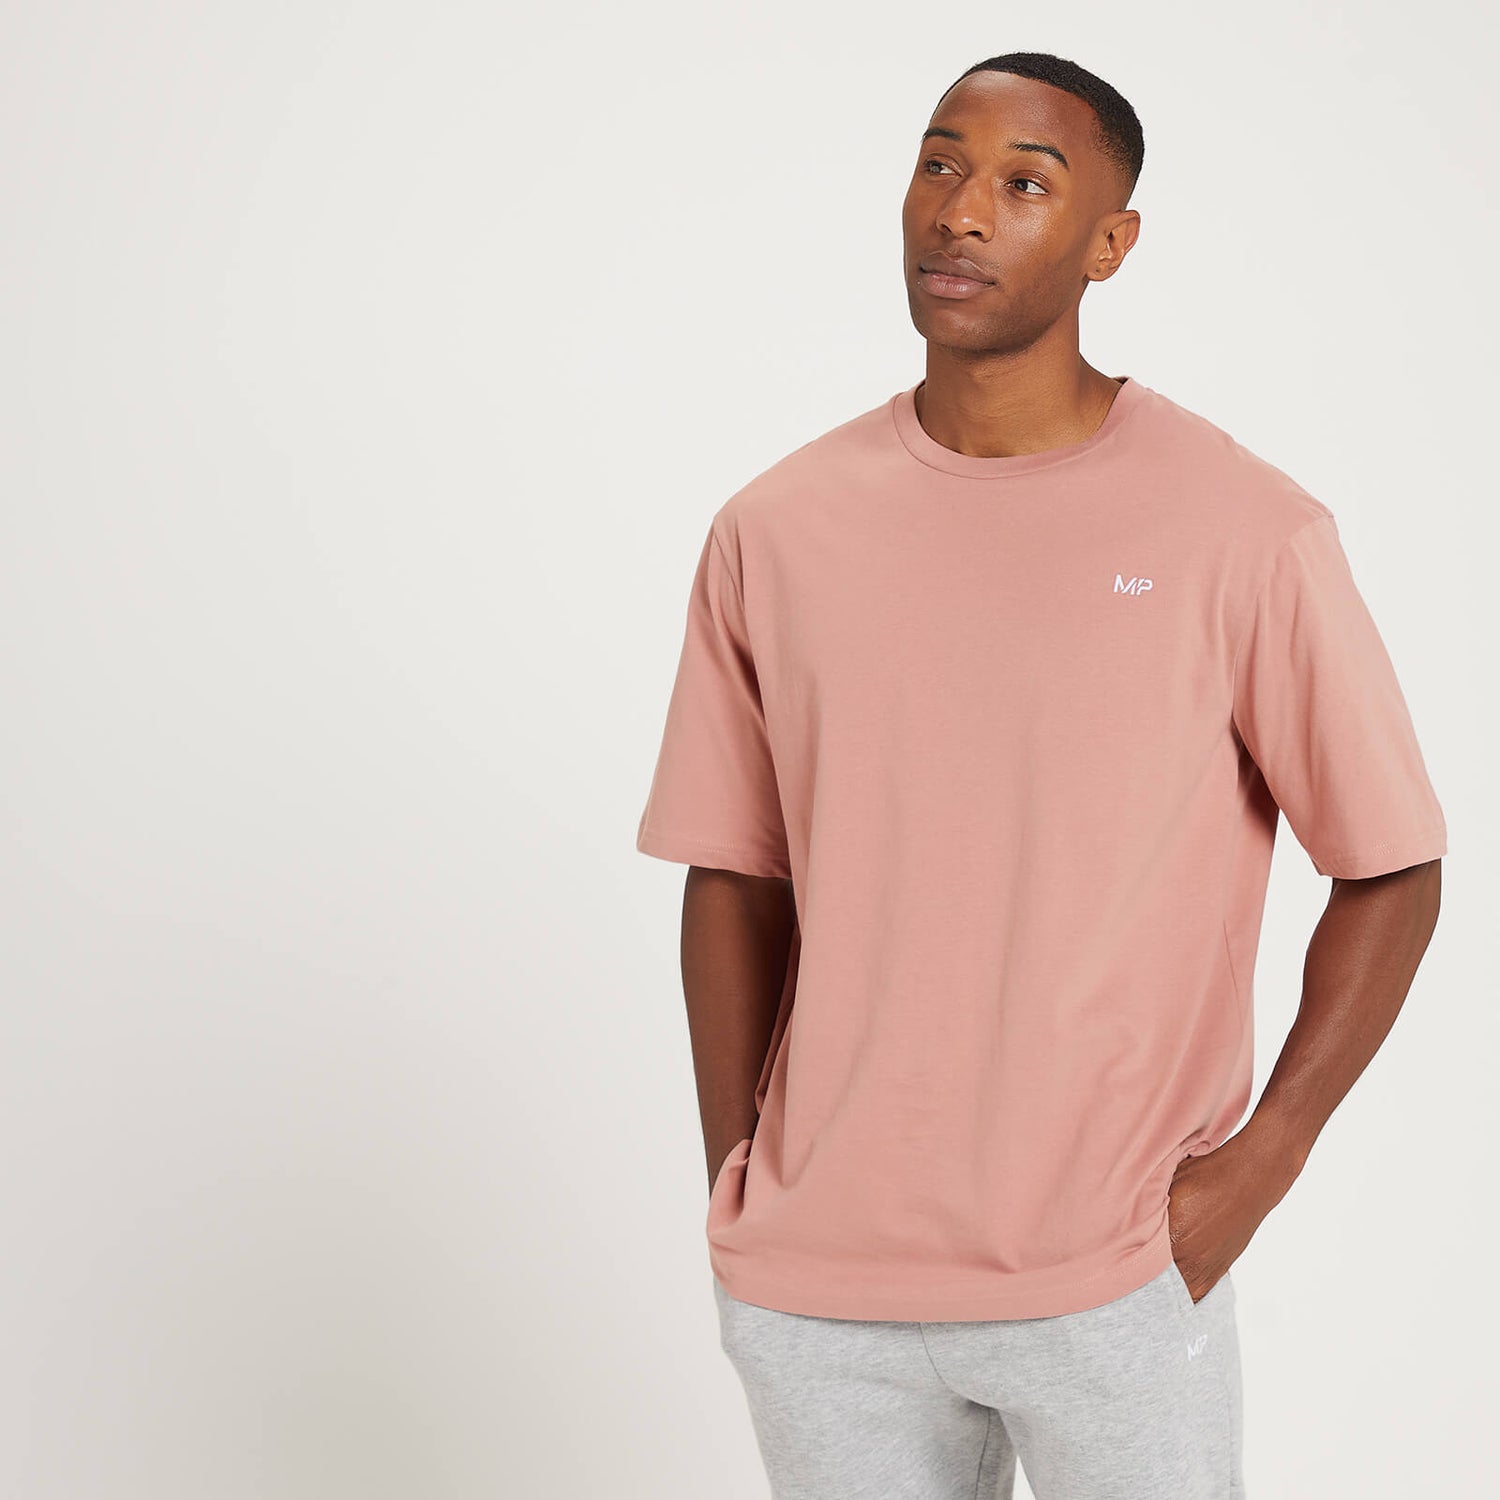 MP Men's Rest Day Oversized T-Shirt - Washed Pink